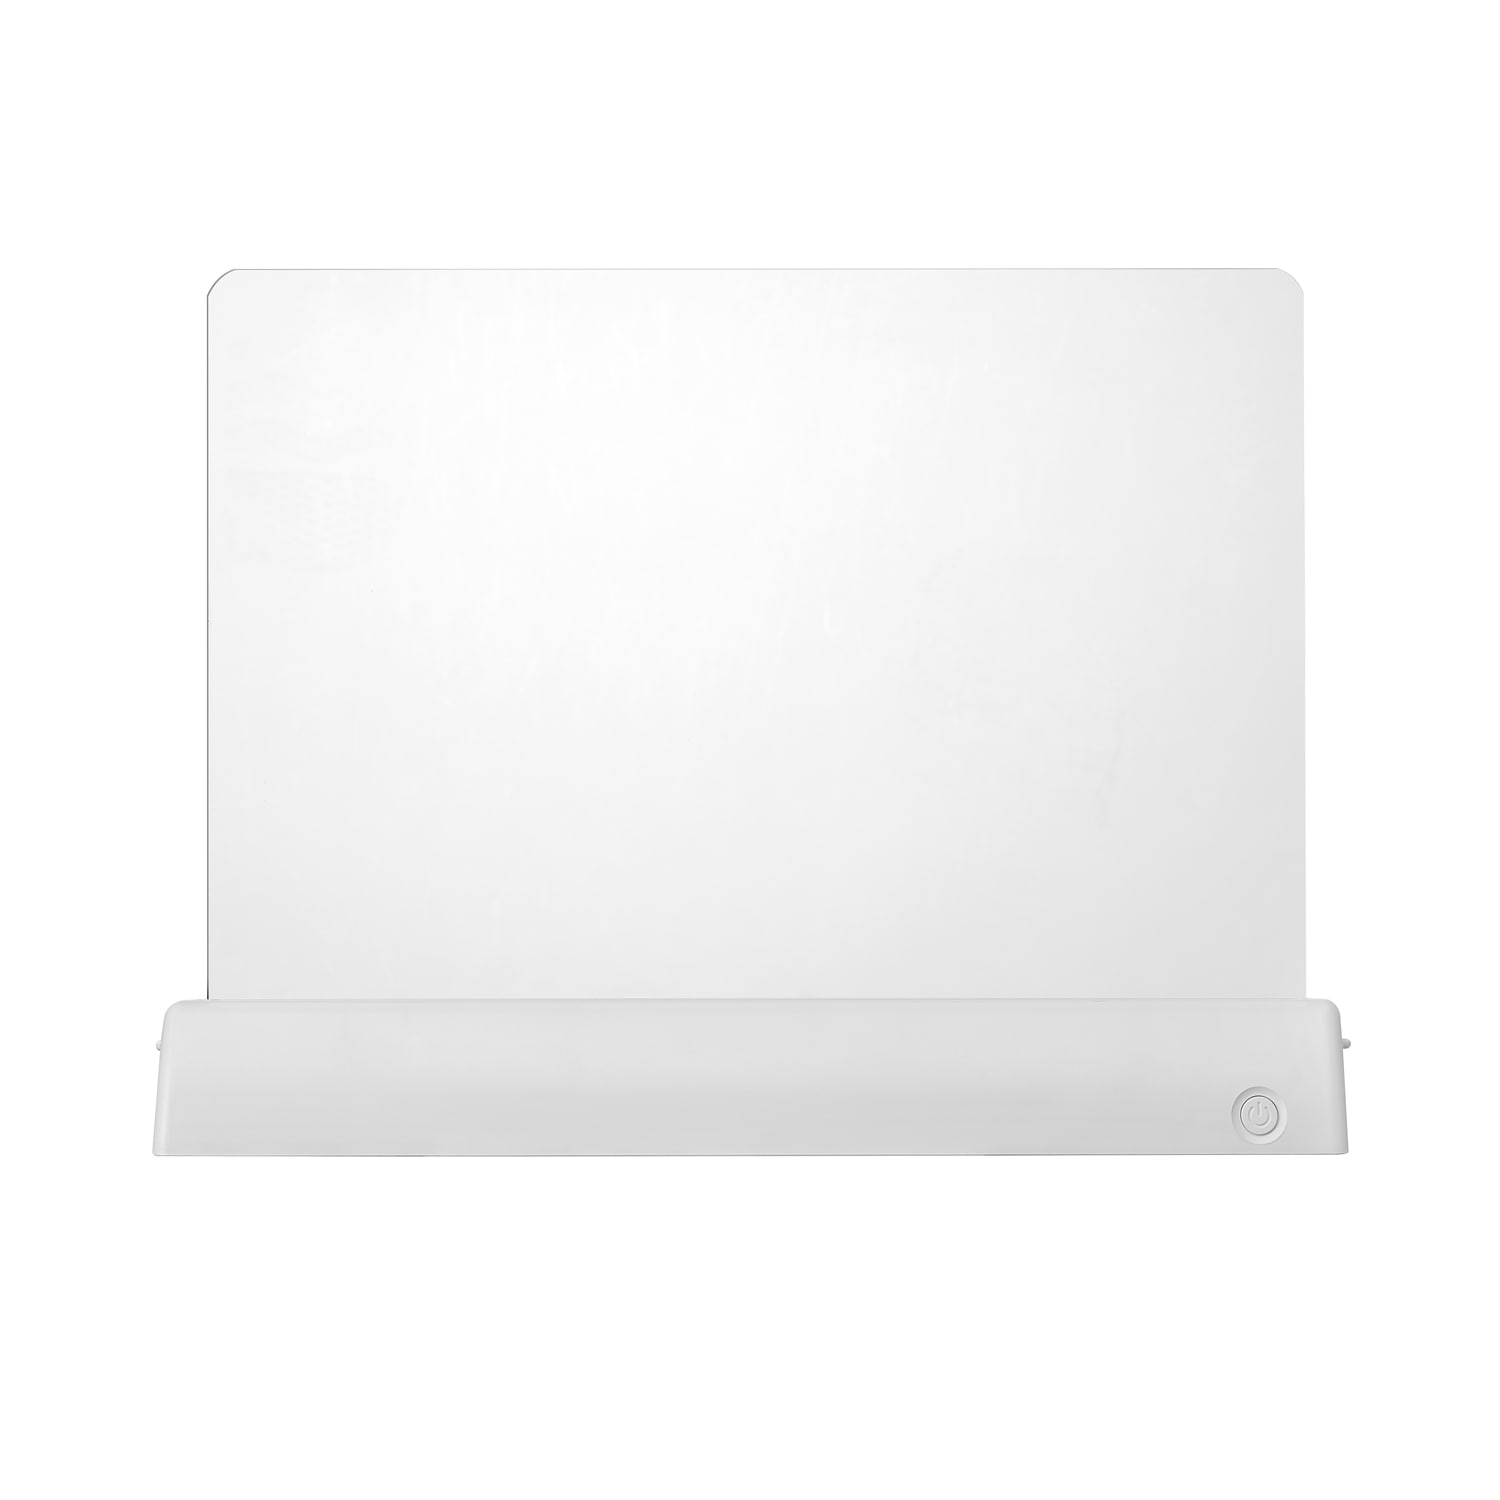 KP15 LED Light Up drawing board